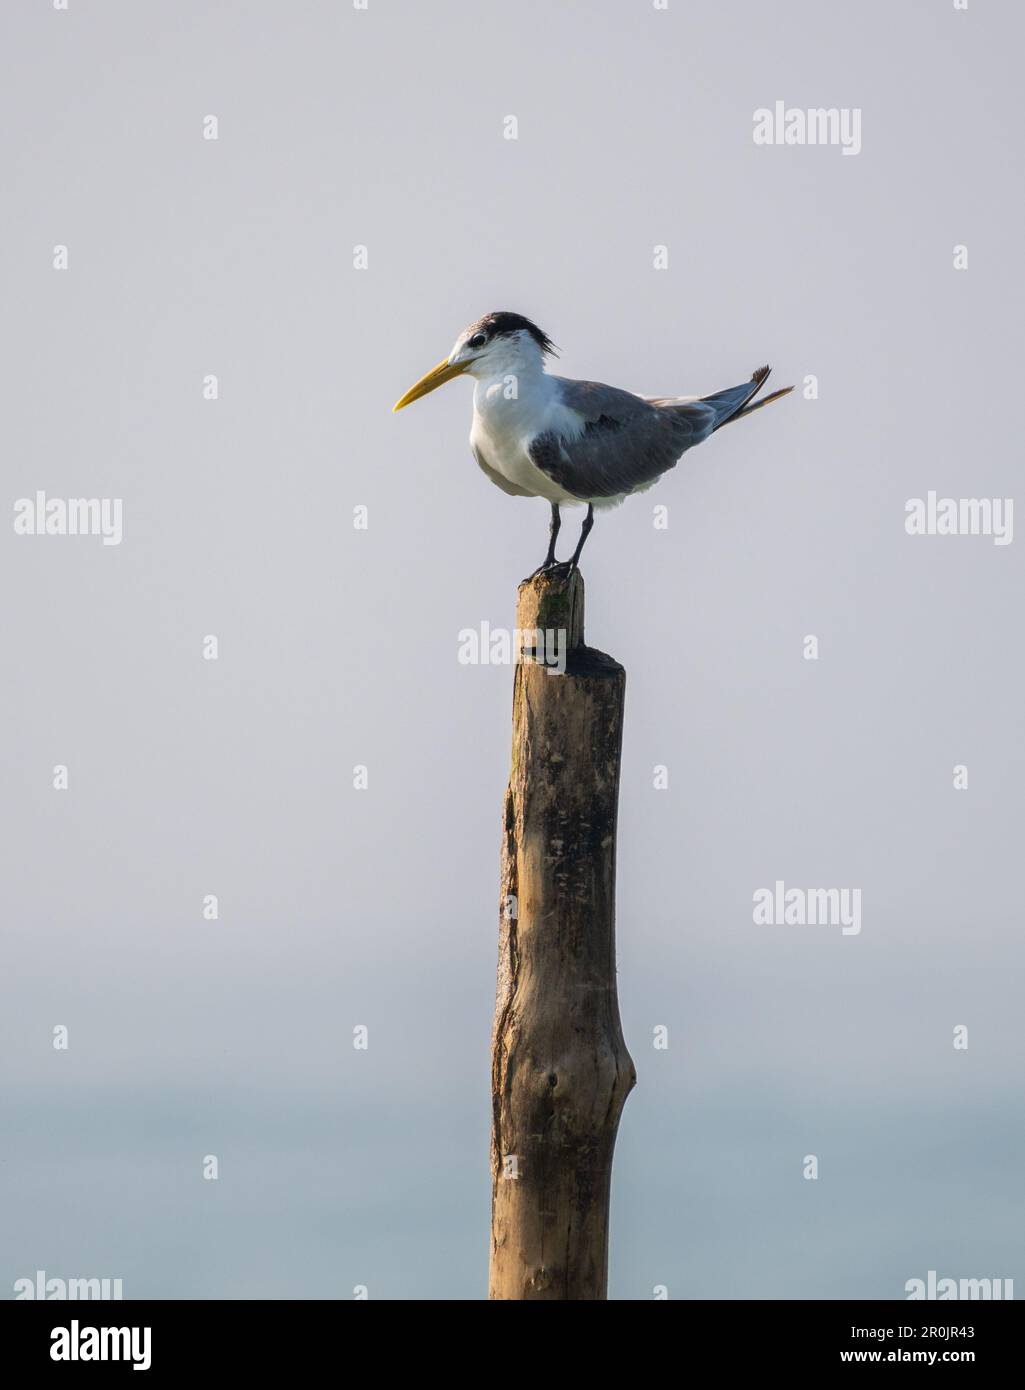 Greater crested tern perch on a wooden pole, Isolated tern against a clear background. Tern bird portraiture. Stock Photo